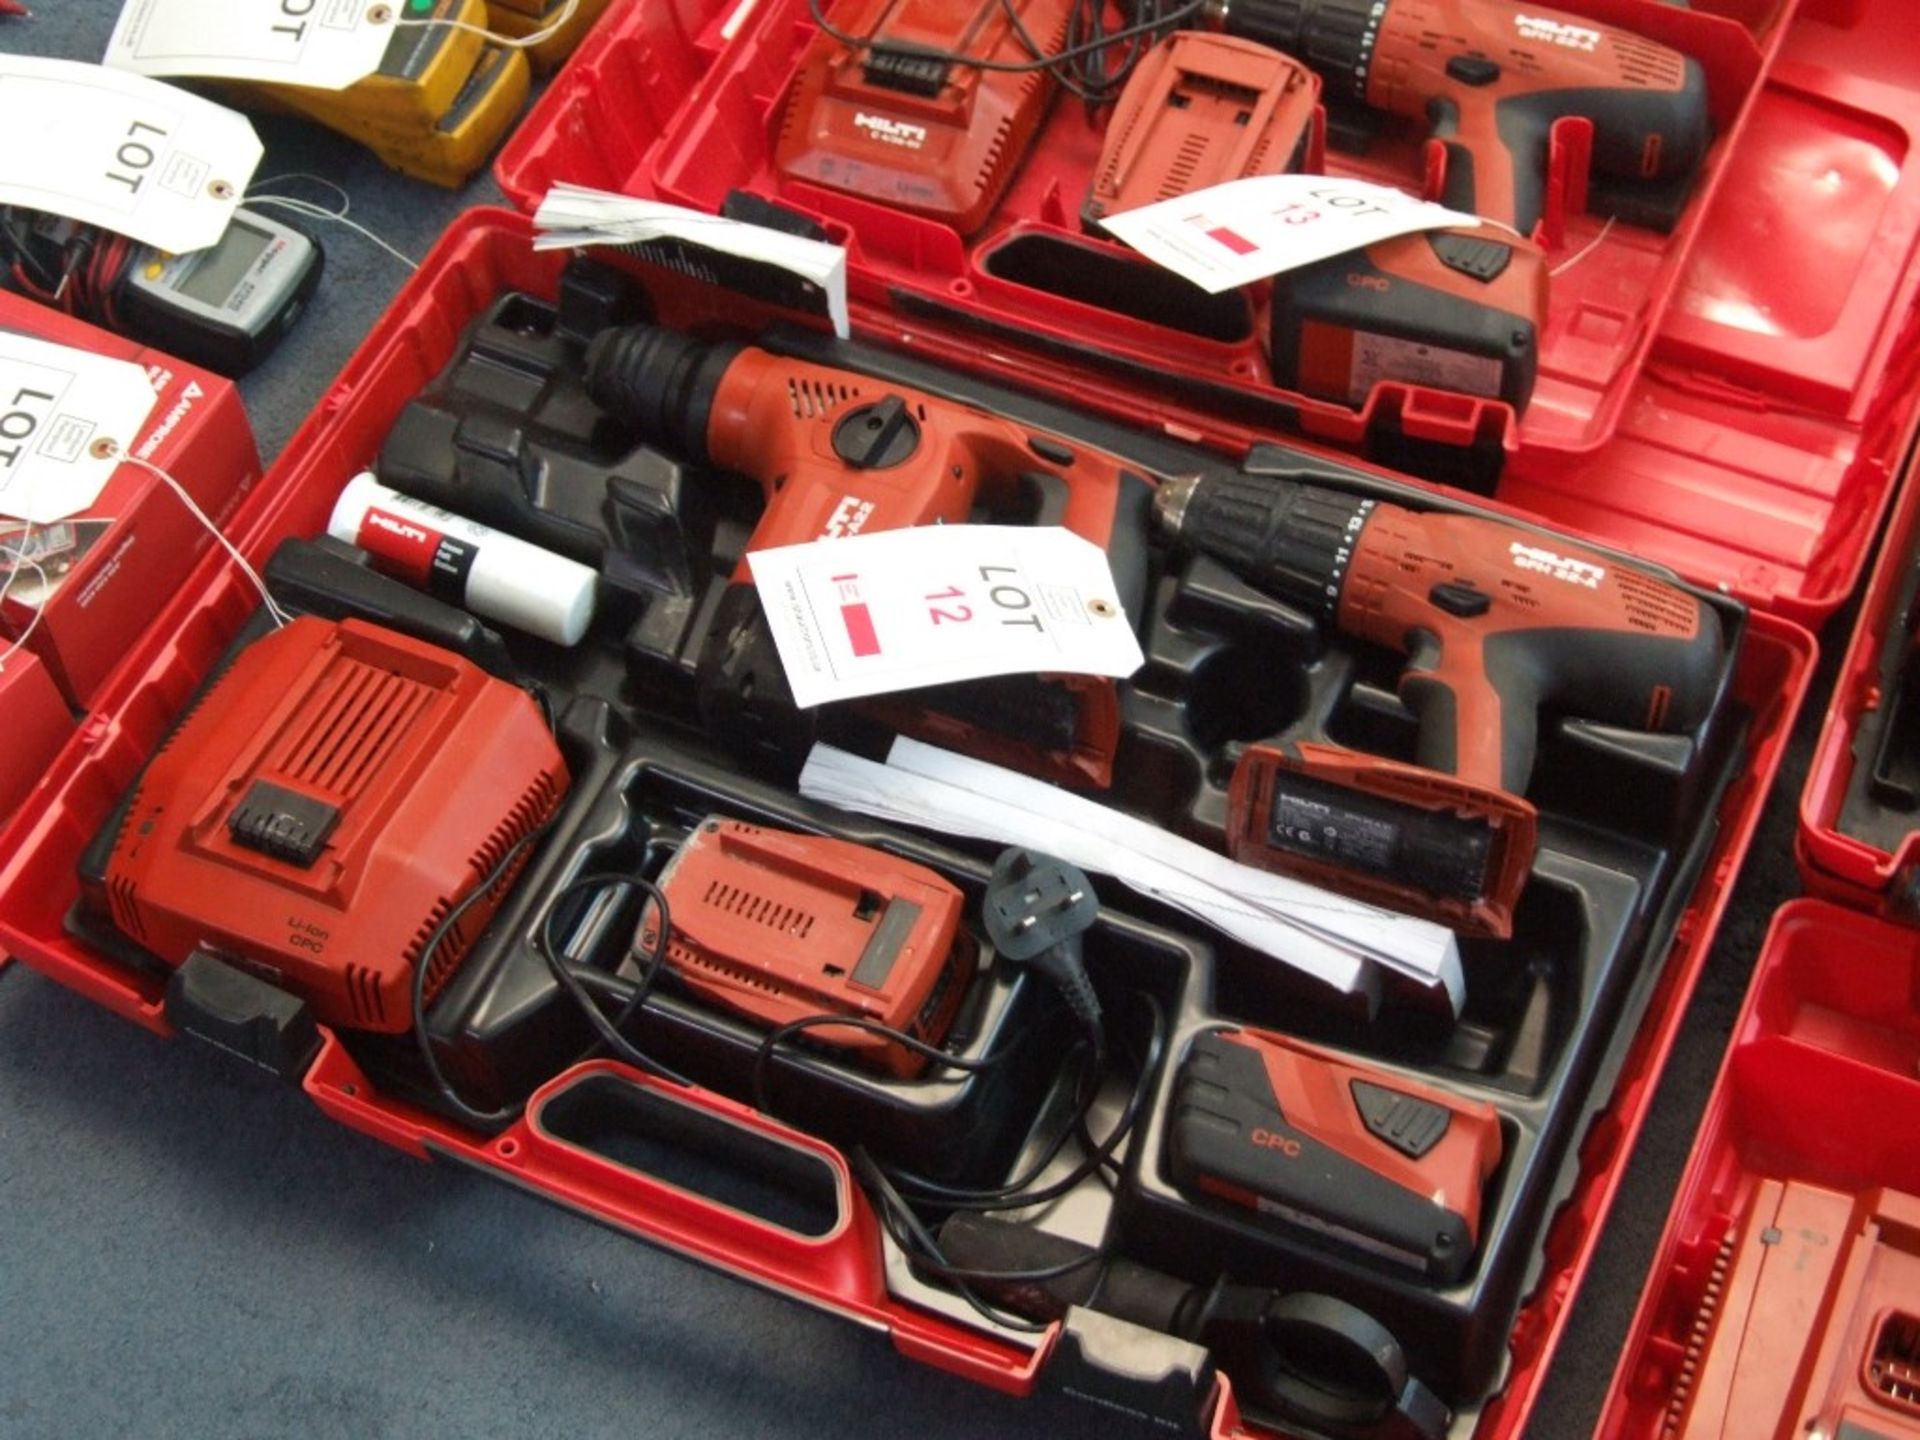 Hilti Cordless Kit consisting of TE4-A22 SDS Plus Drill and SFA 22-A 2 Speed Hammer Drill